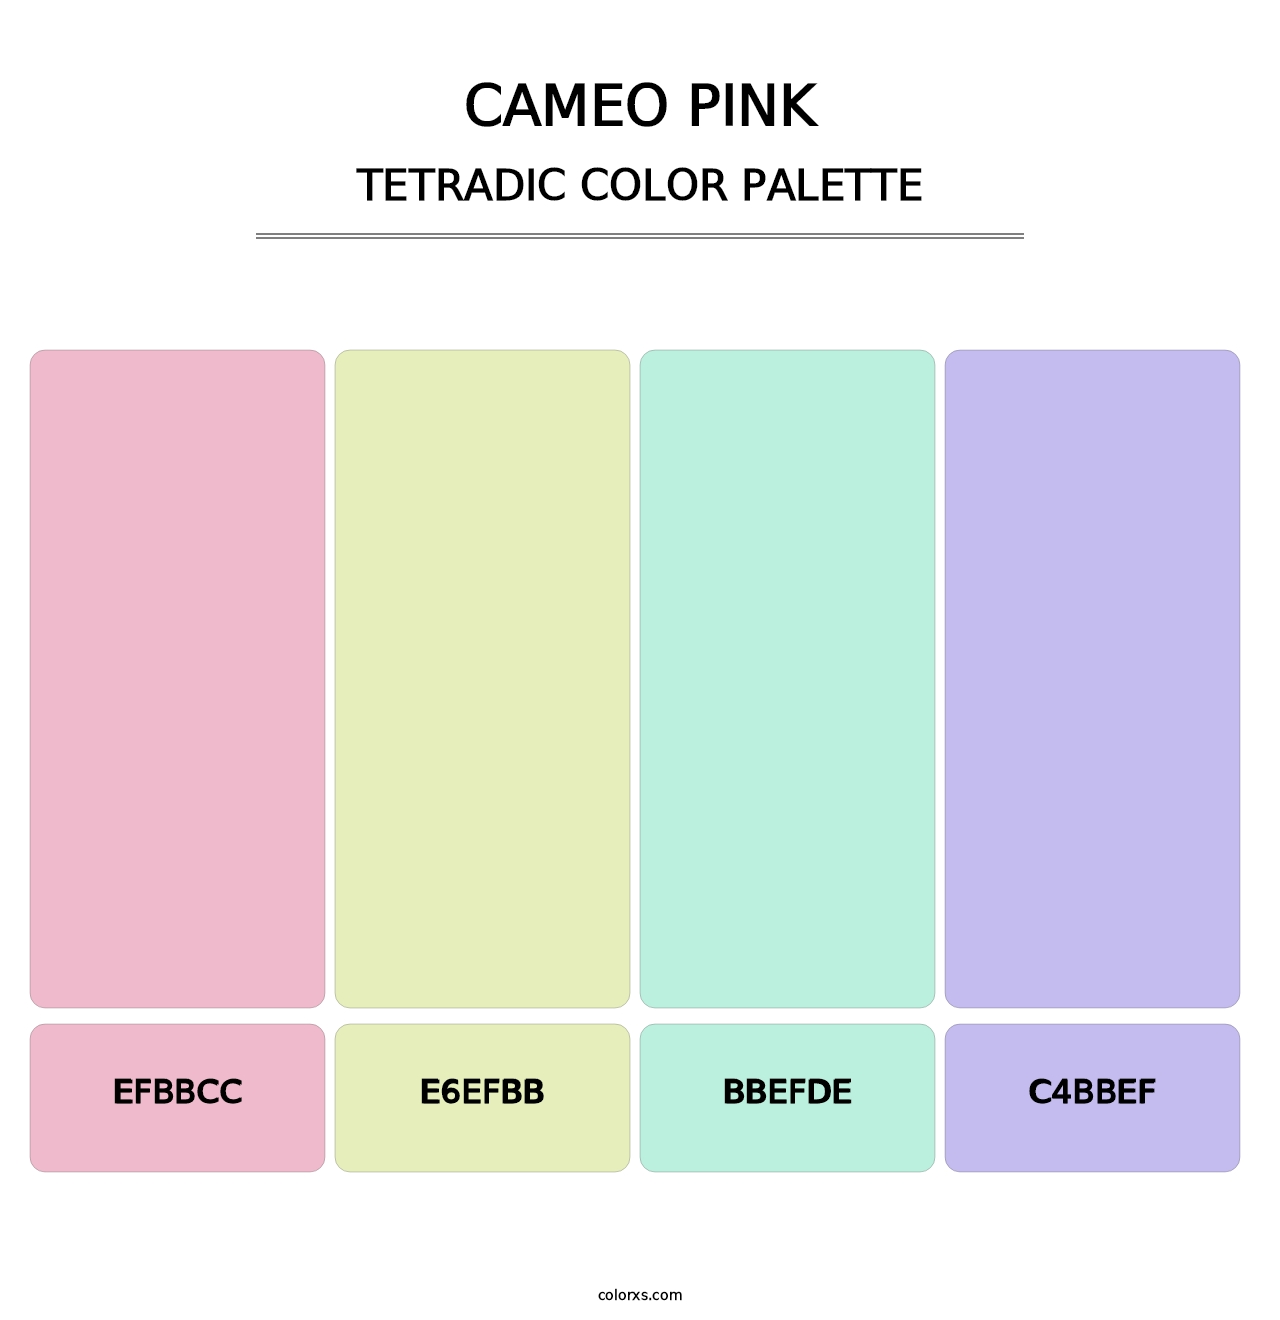 Cameo Pink - Tetradic Color Palette